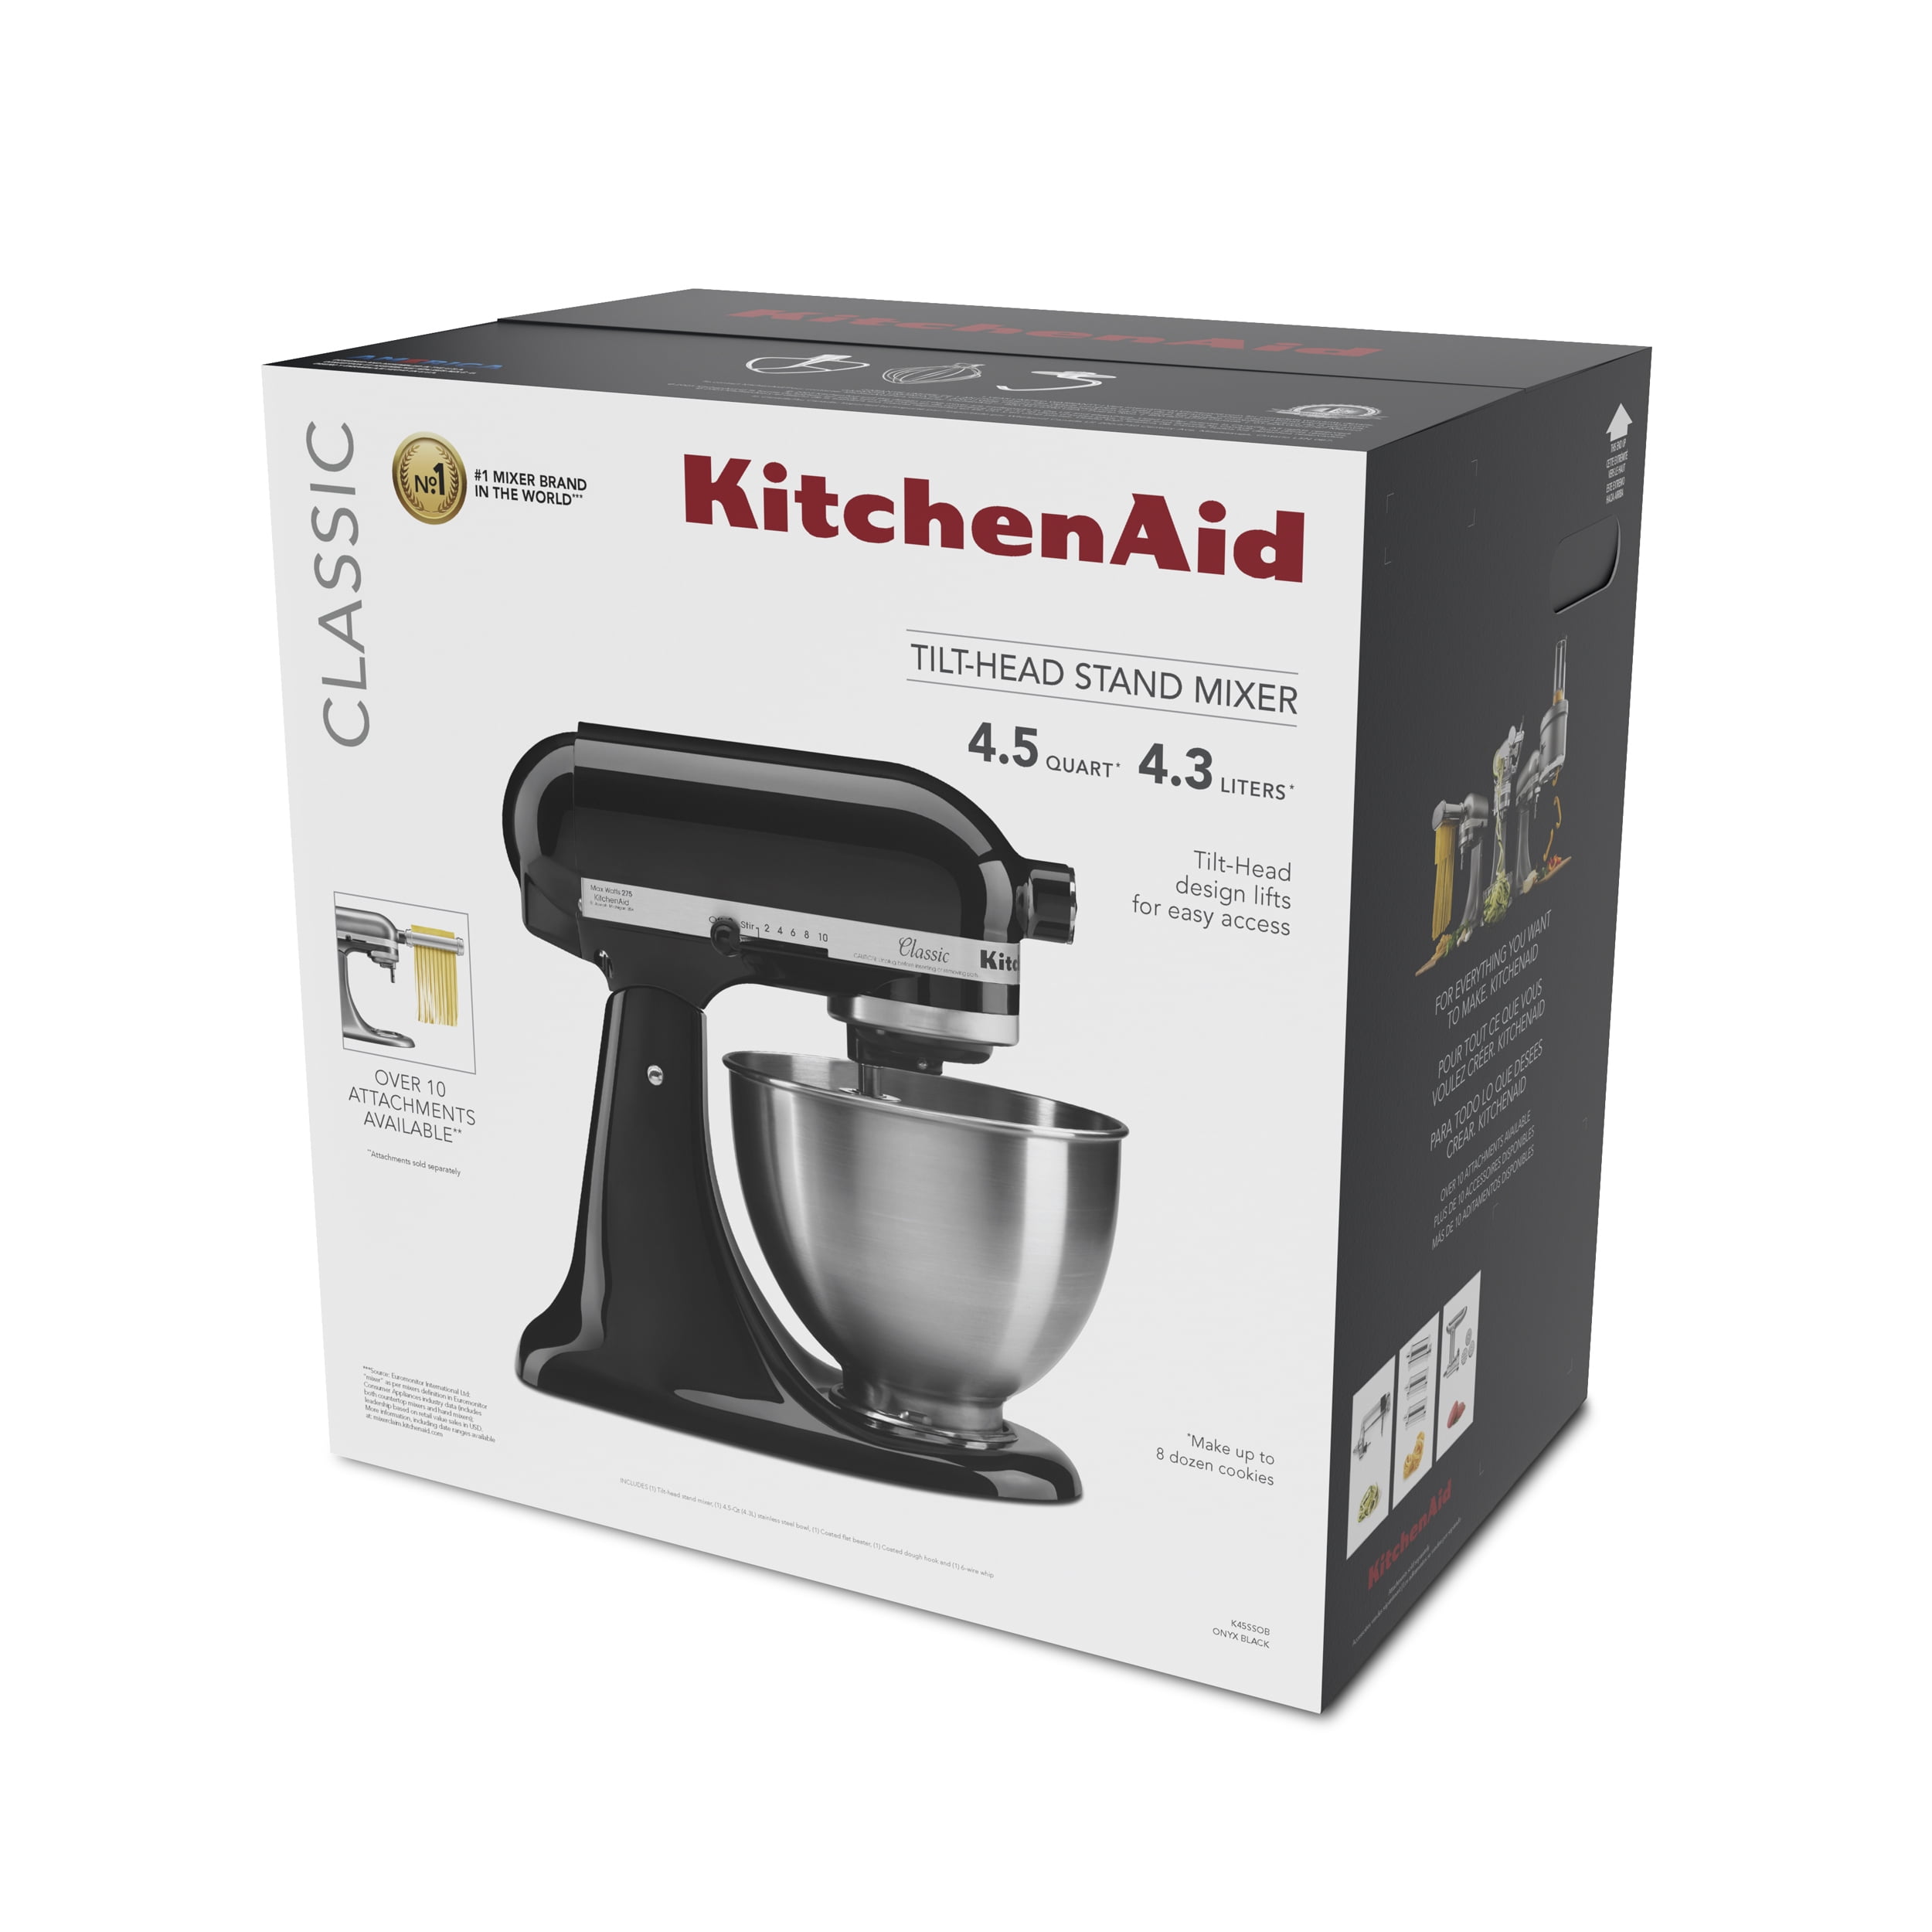 Pistachio Kitchenaid Model K45 Classic Series Stand Mixer With Attachments.  Free Shipping 